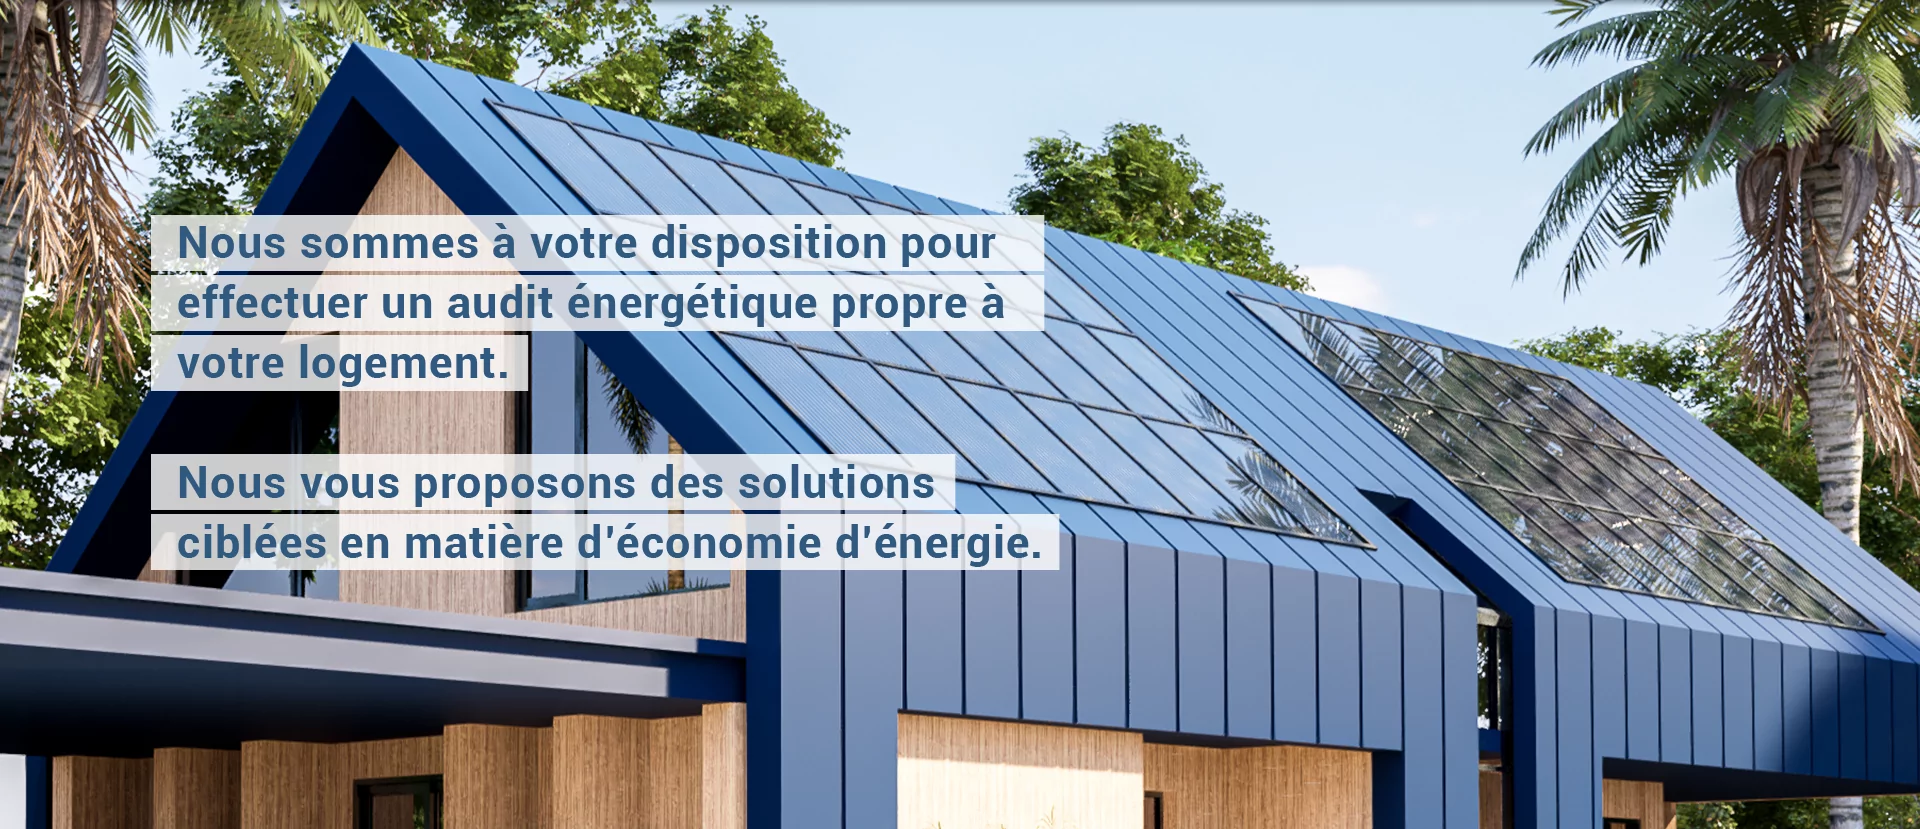 Installateur Panneaux Solaires Viroflay 78220